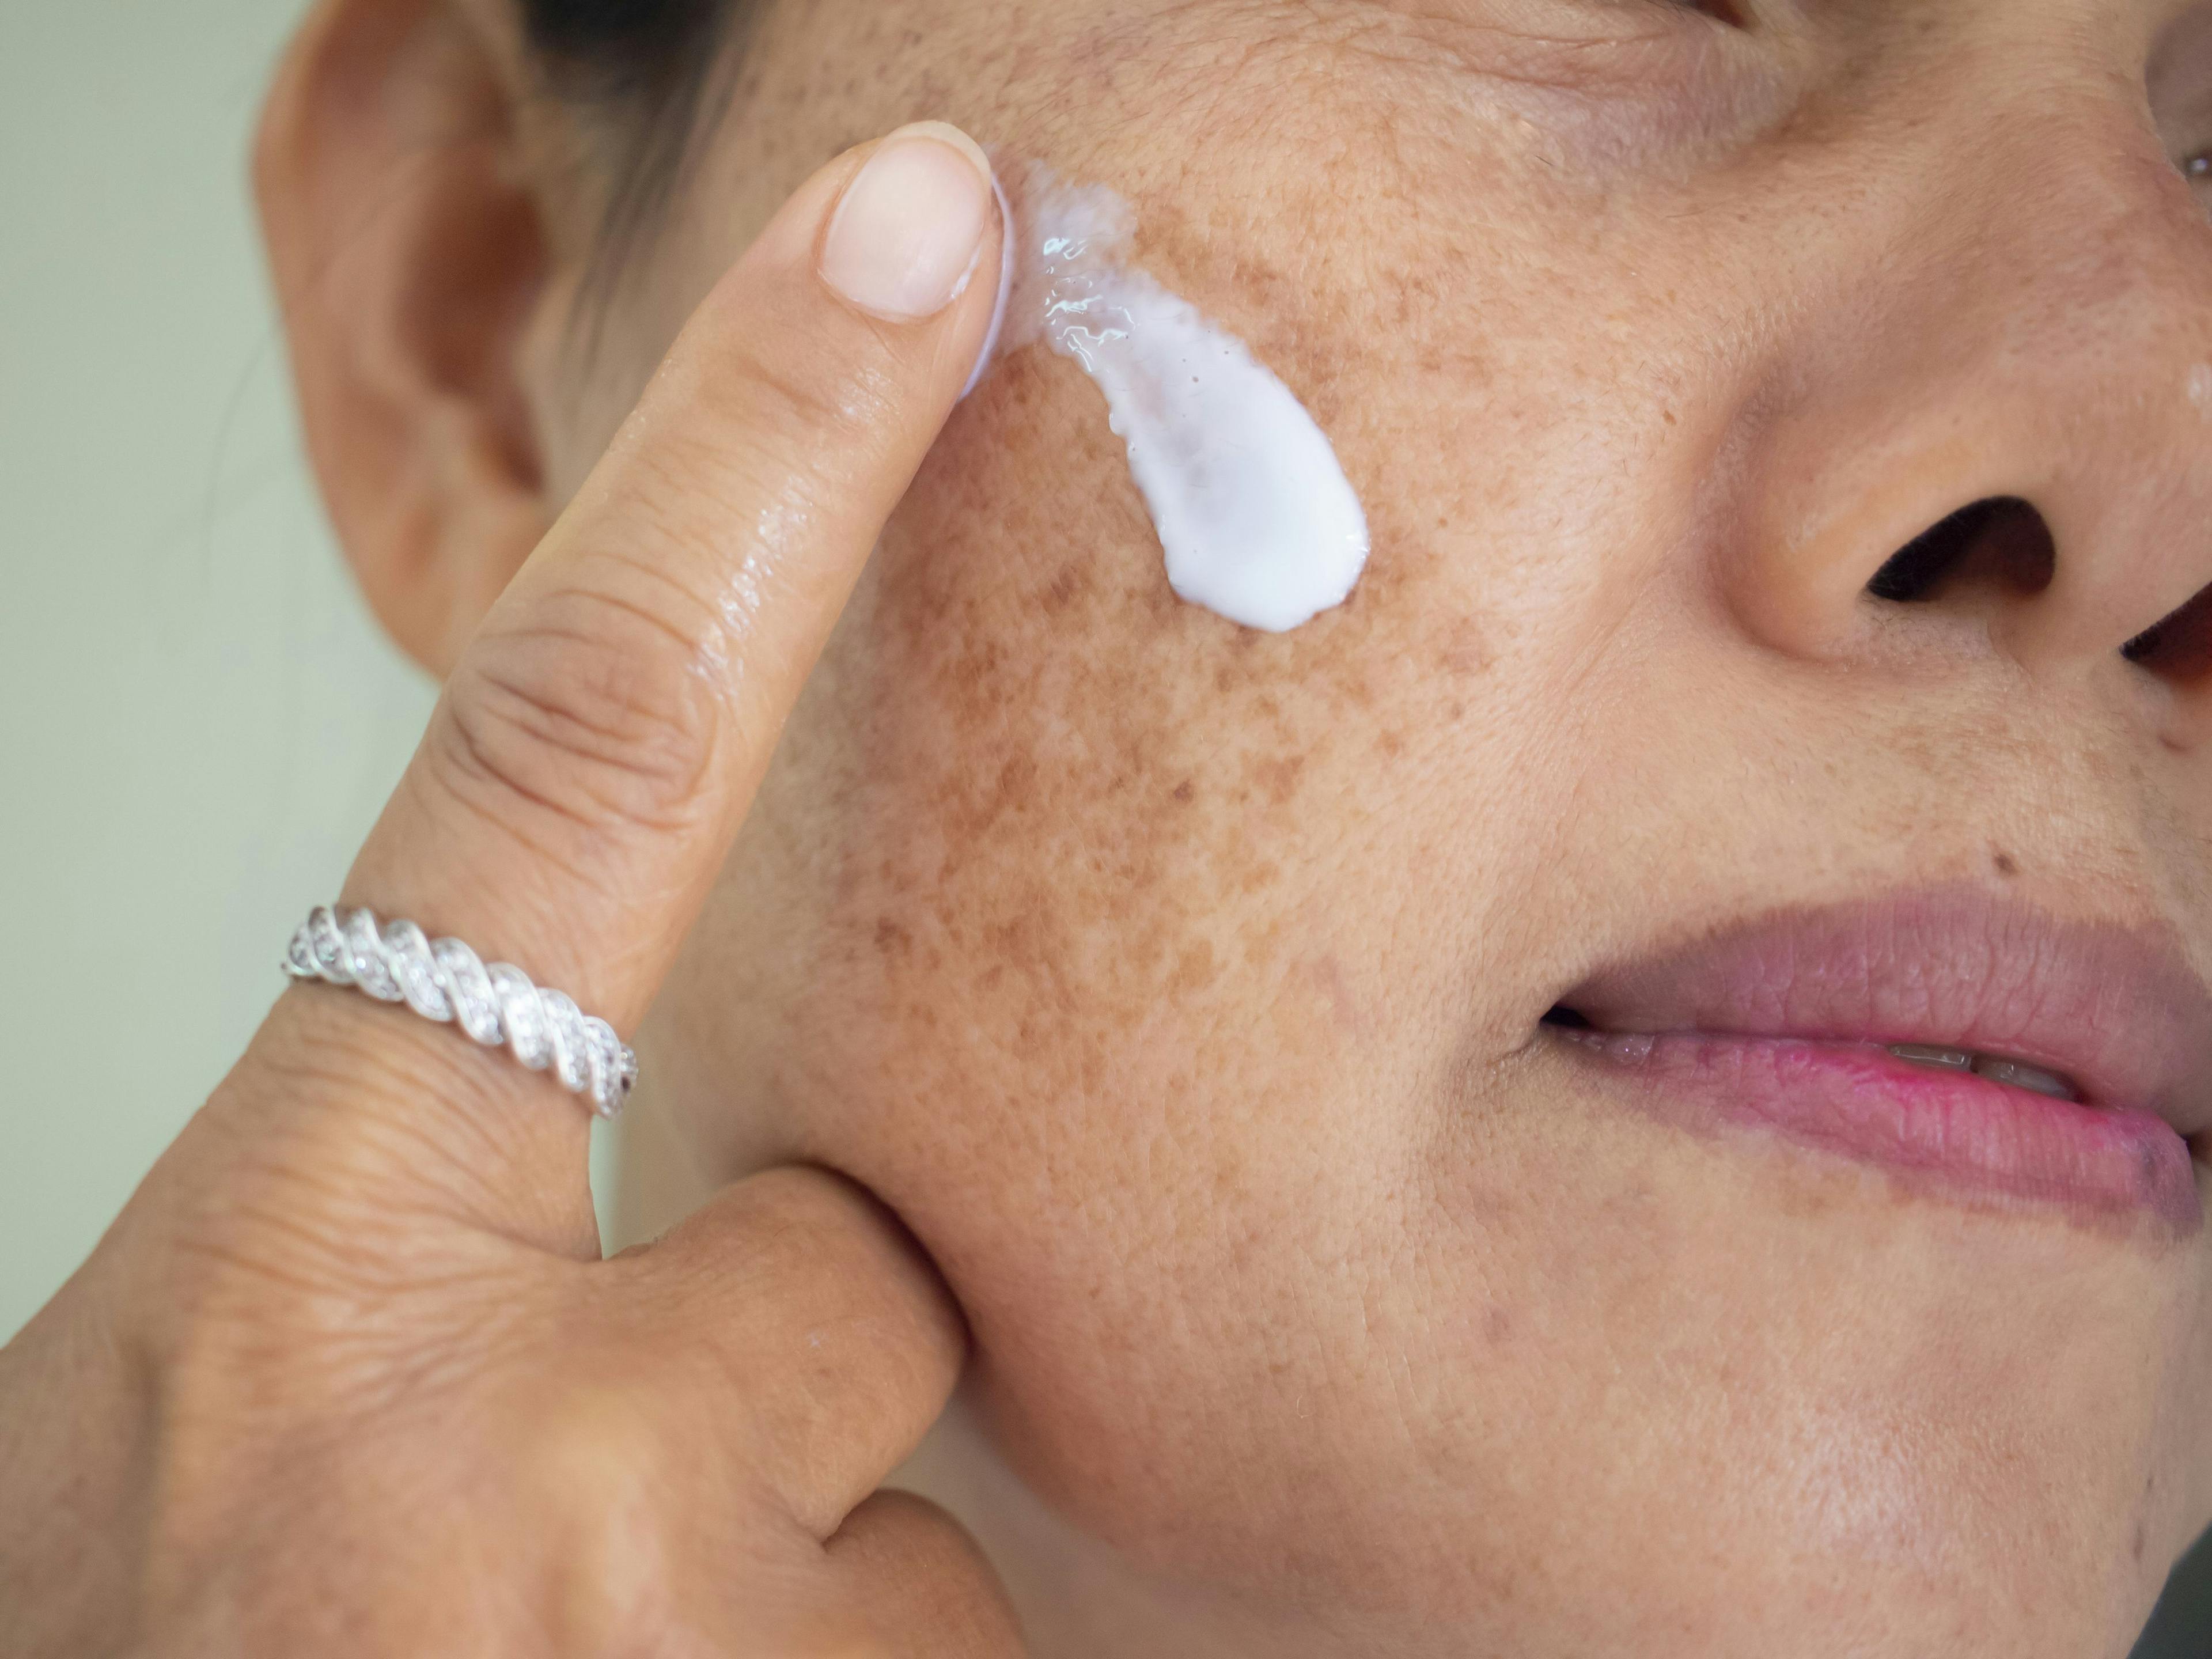 POLL: Is the skin care market too saturated?